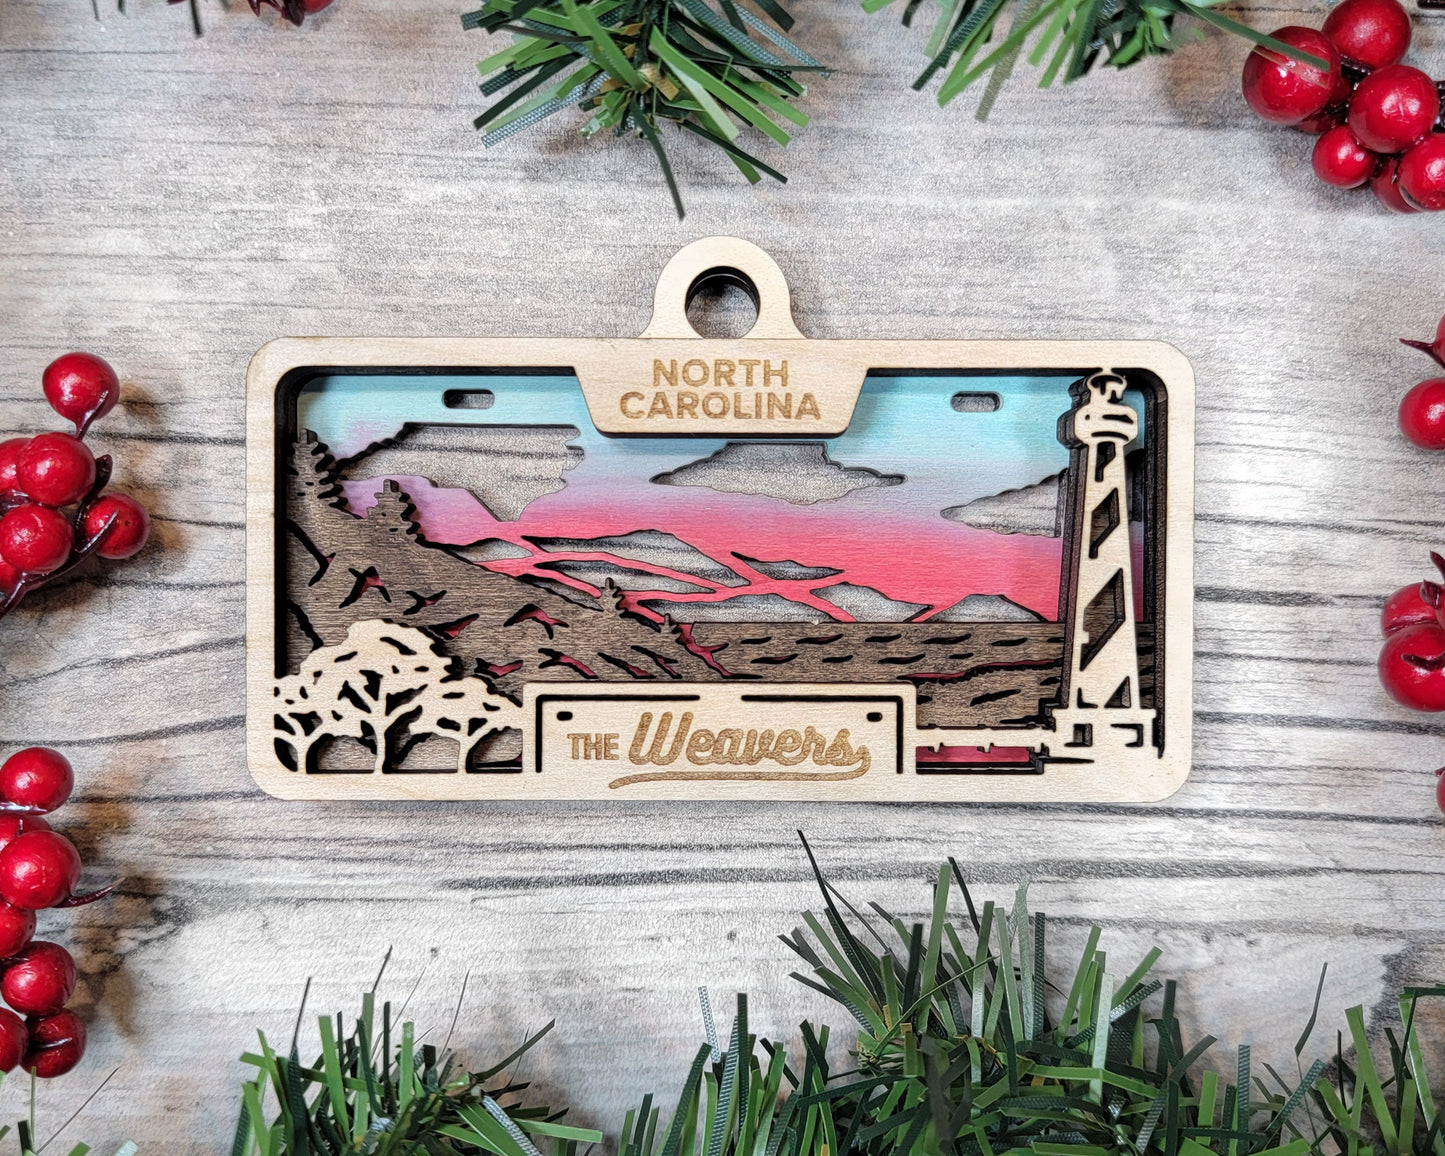 North Carolina State Plate Ornament and Signage - SVG File Download - Sized for Glowforge - Laser Ready Digital Files